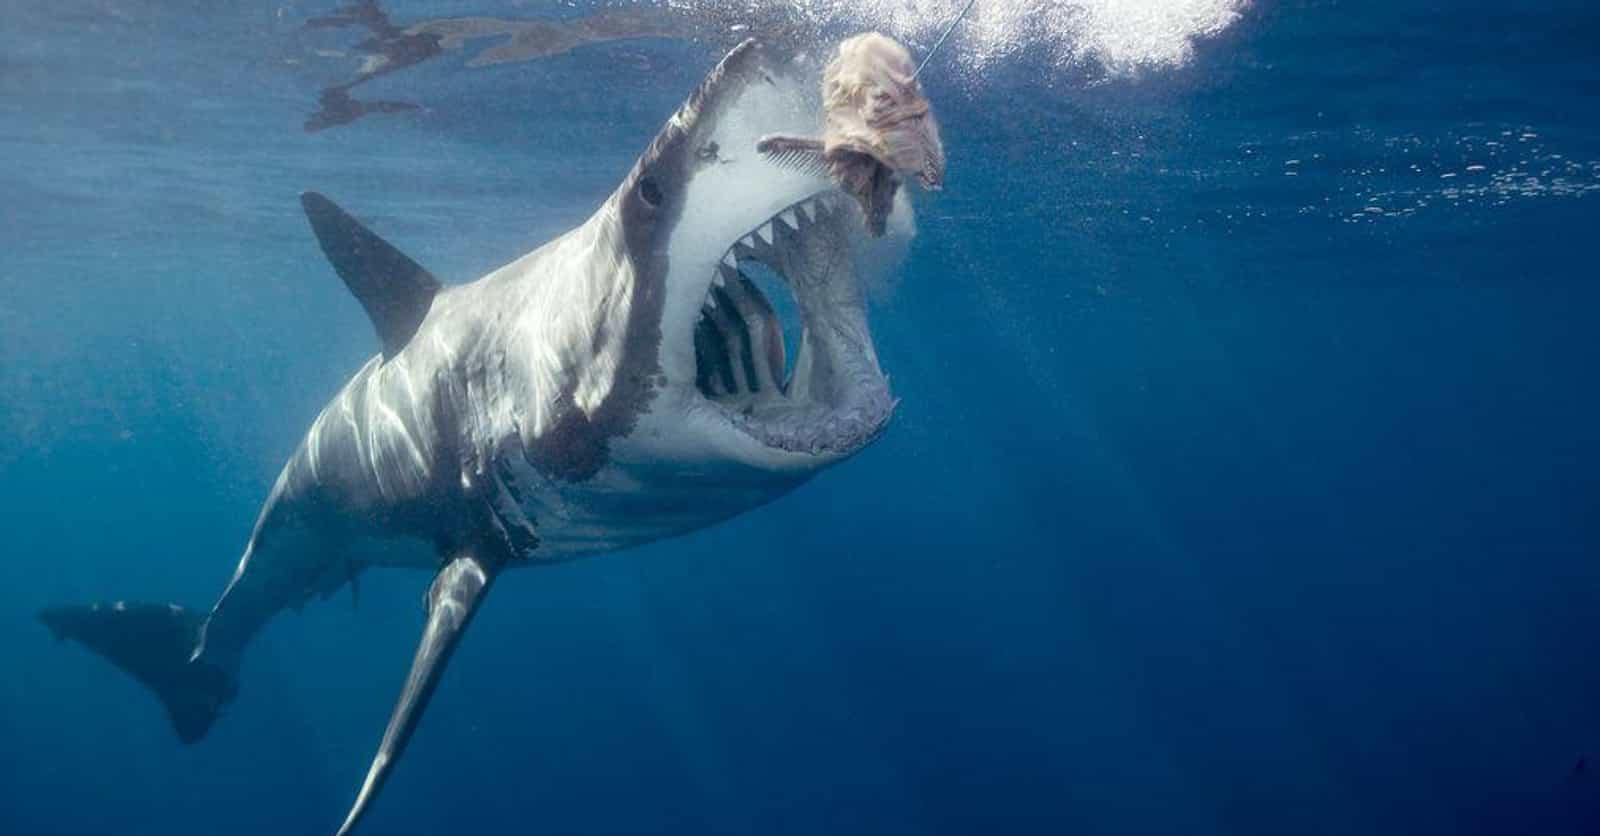 'Jaws' Made Us Believe Some Ludicrous Shark Myths—And It Had Devastating Real-World Effects